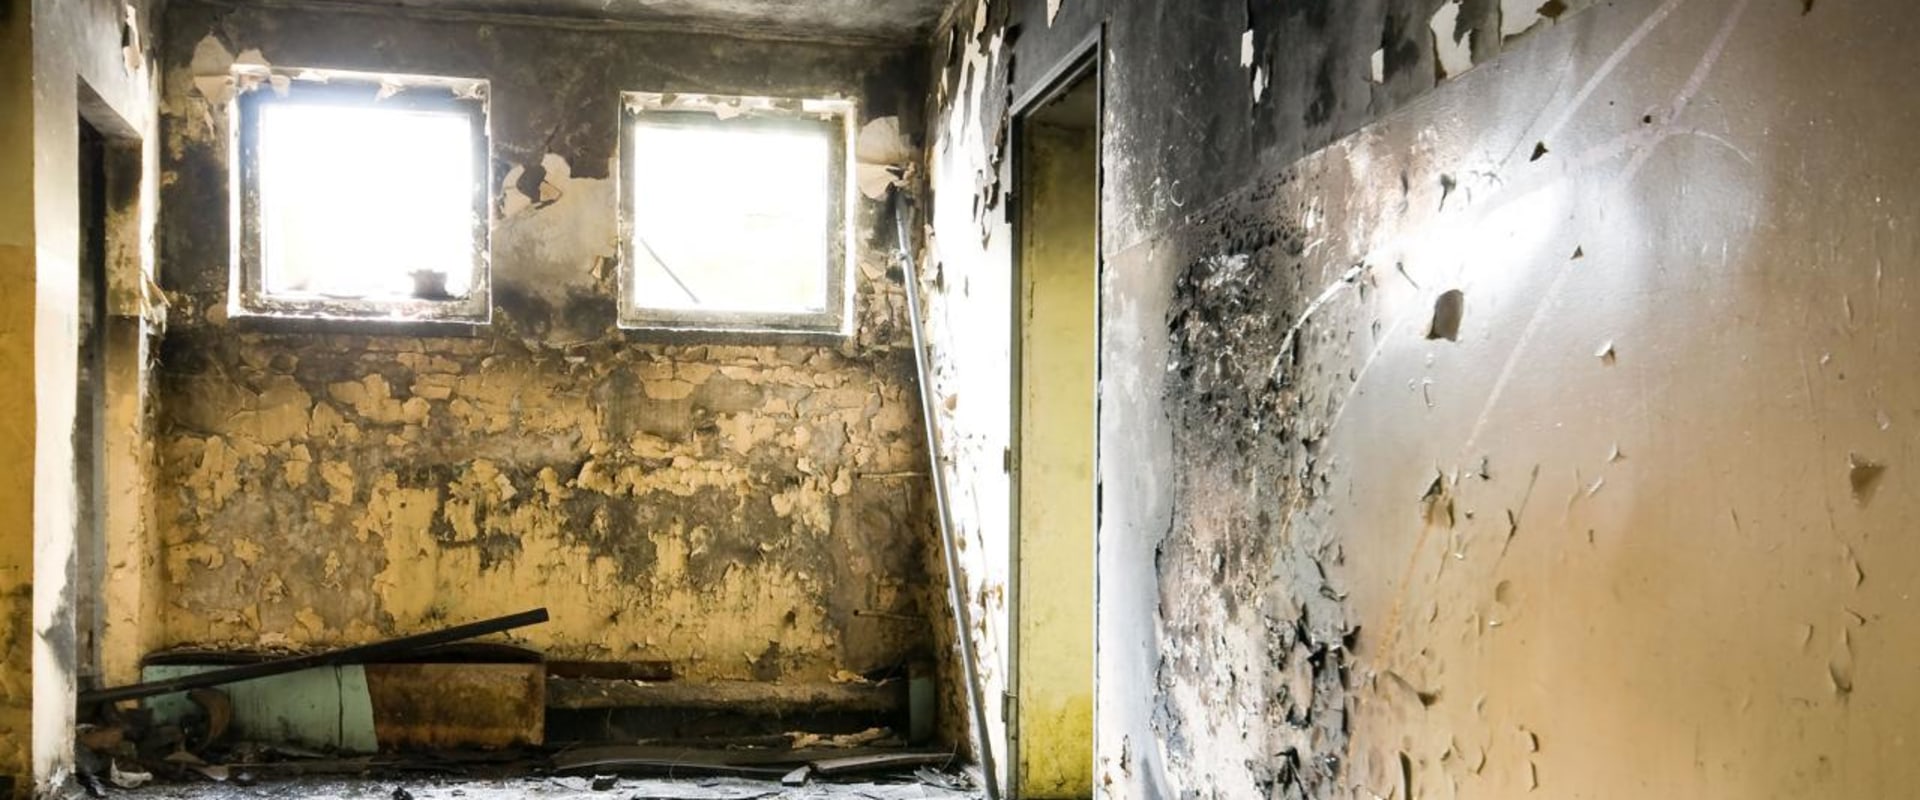 Can cleaning black mold make you sick?